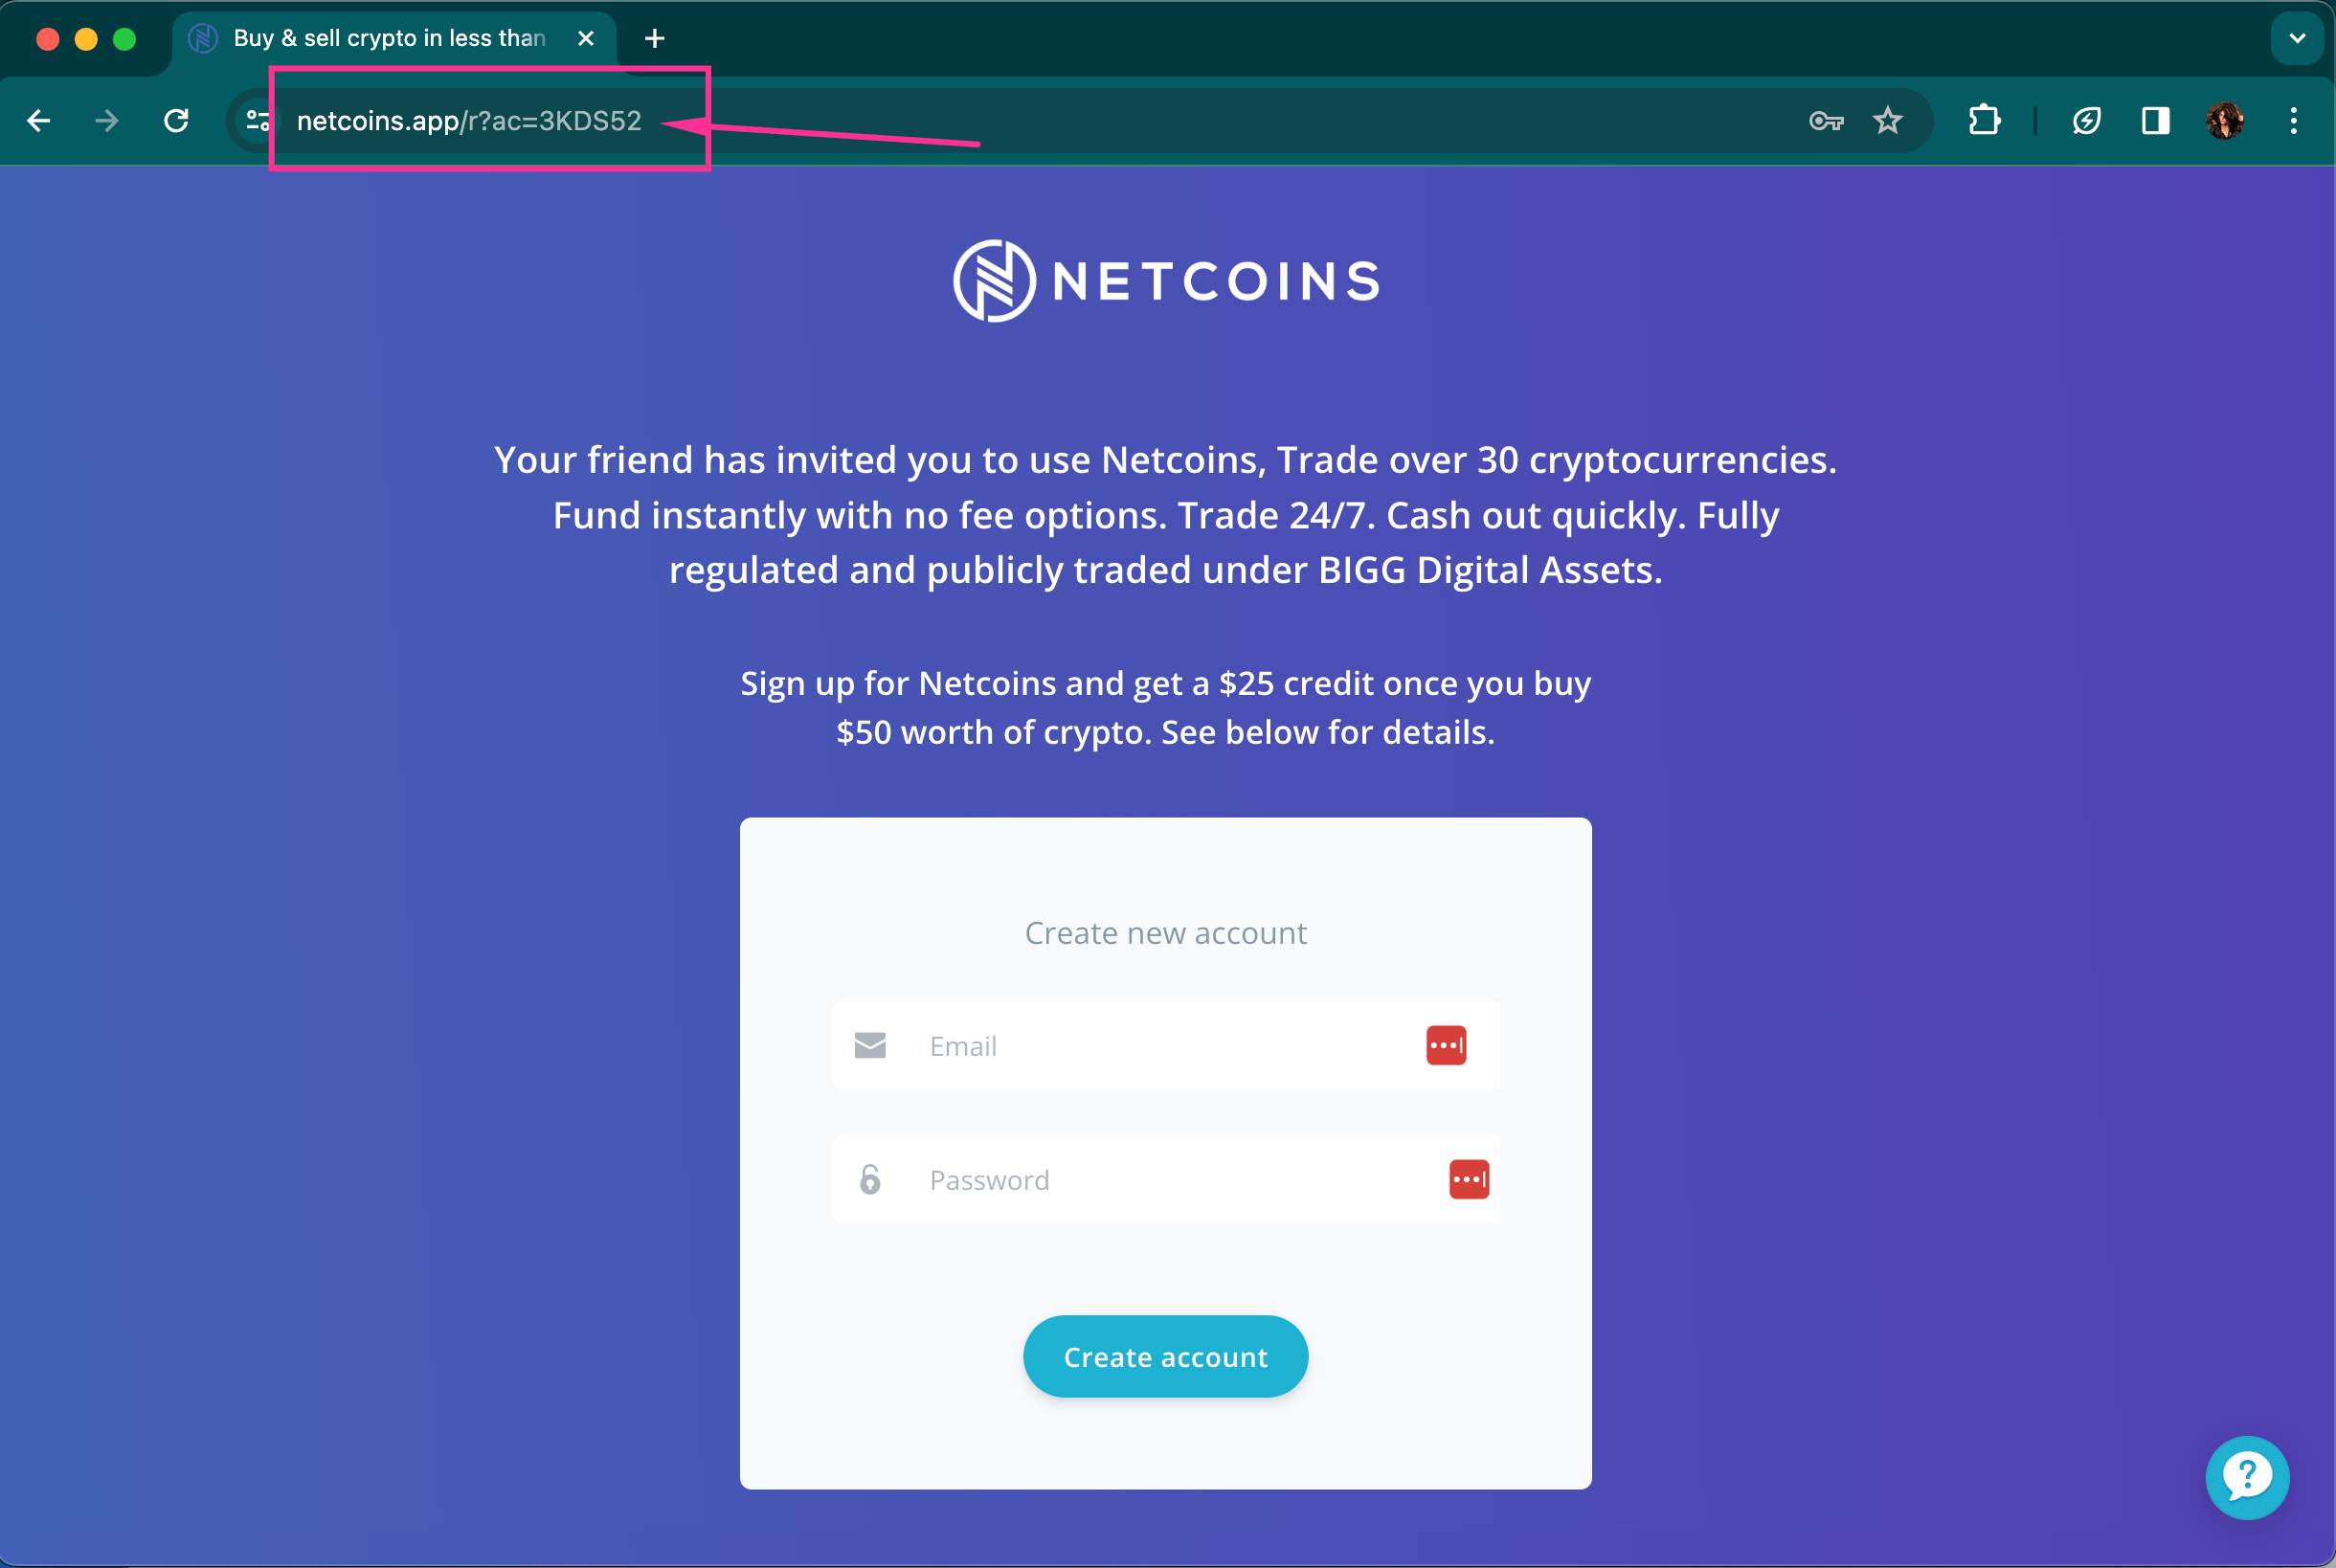 Netcoins referral code